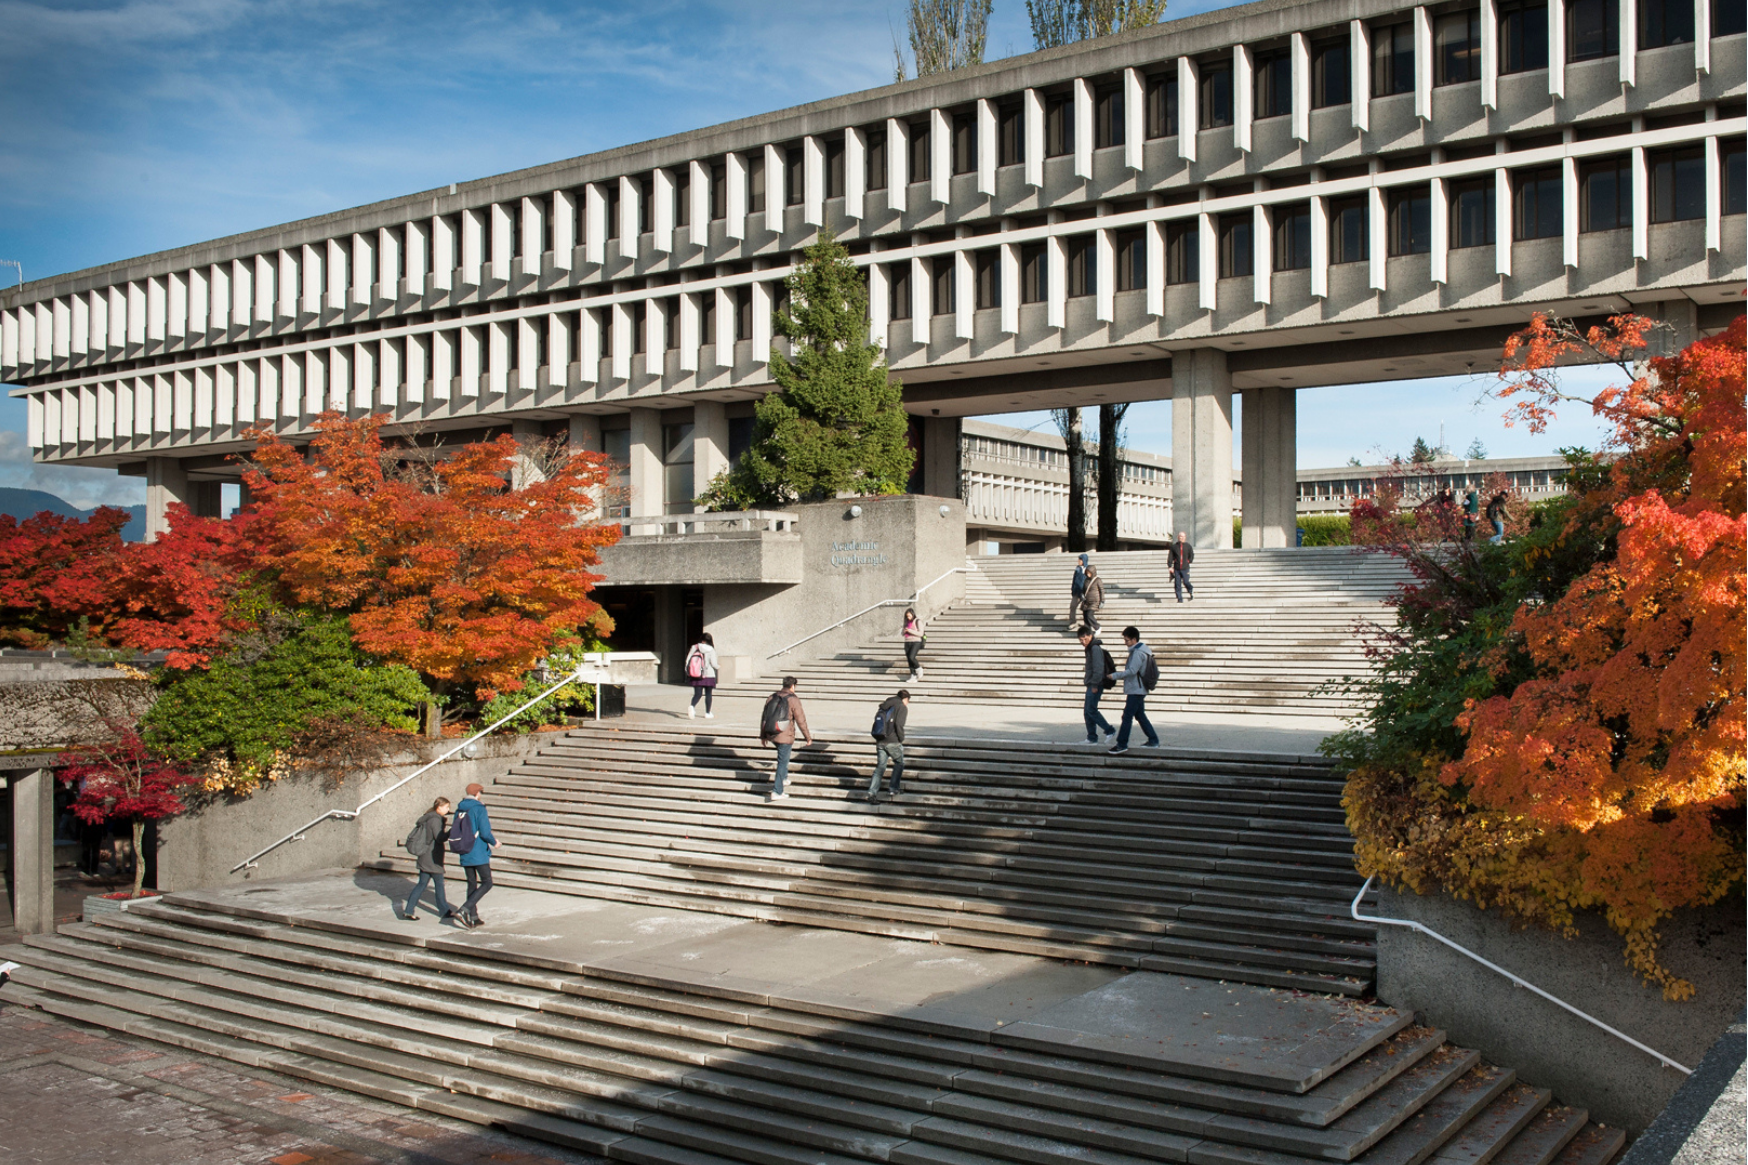 Bird's eye view of SFU's AQ building with people walking up the stairs.